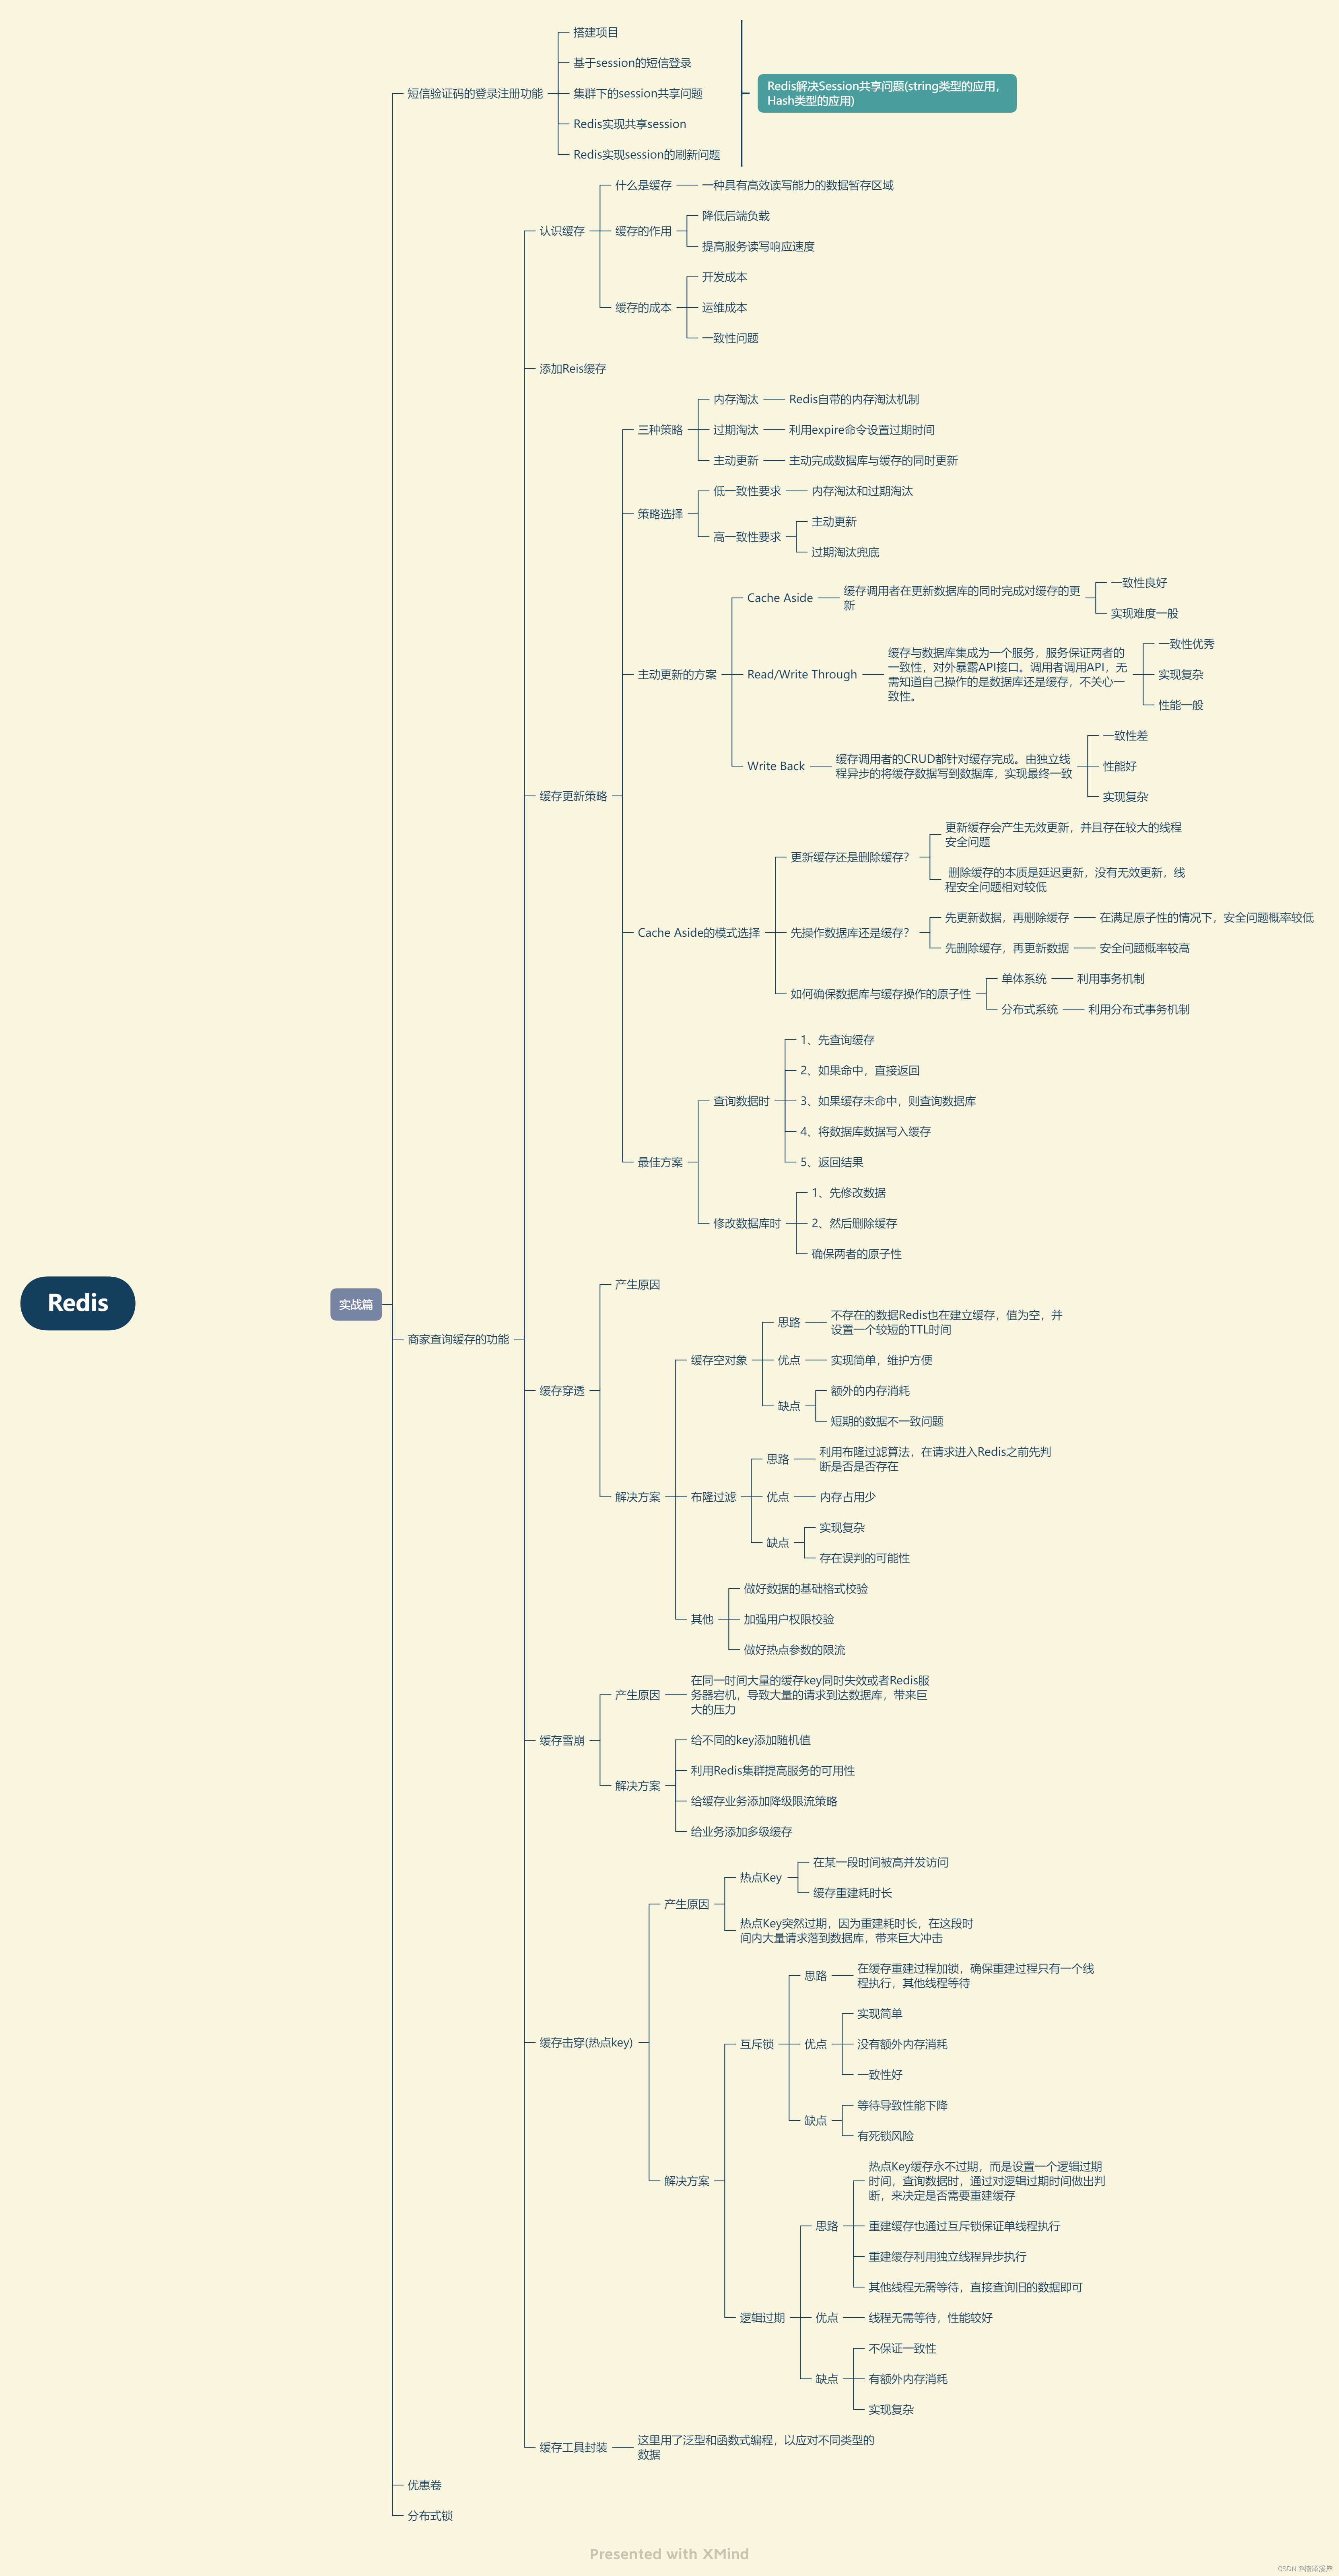 Mind map about store cache